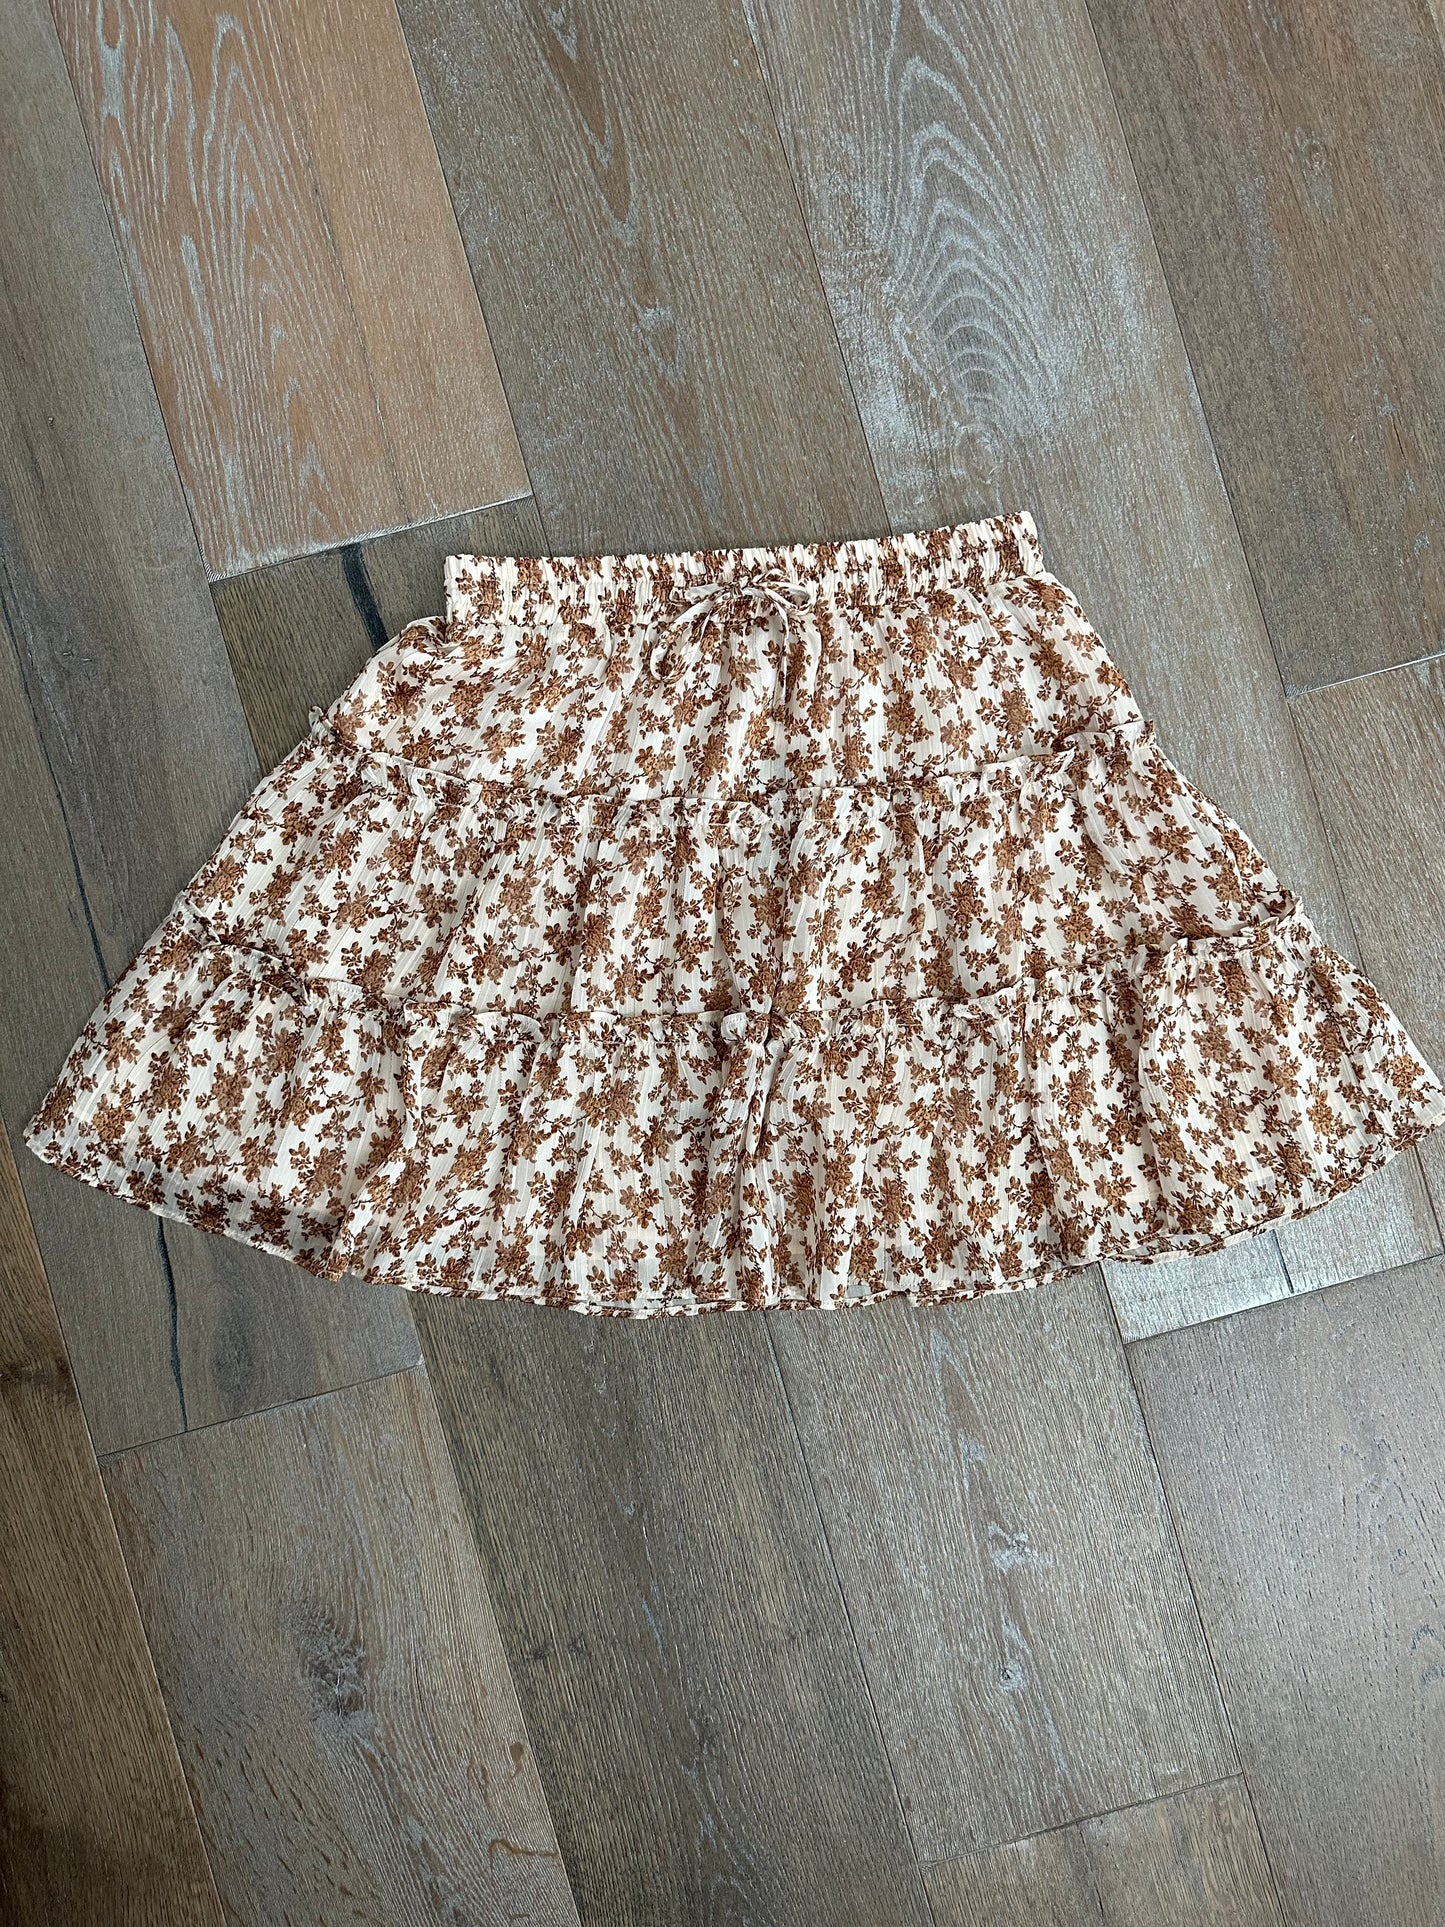 Jessa Ruffle Short 3 tiered Skirt. Brown floral on white background